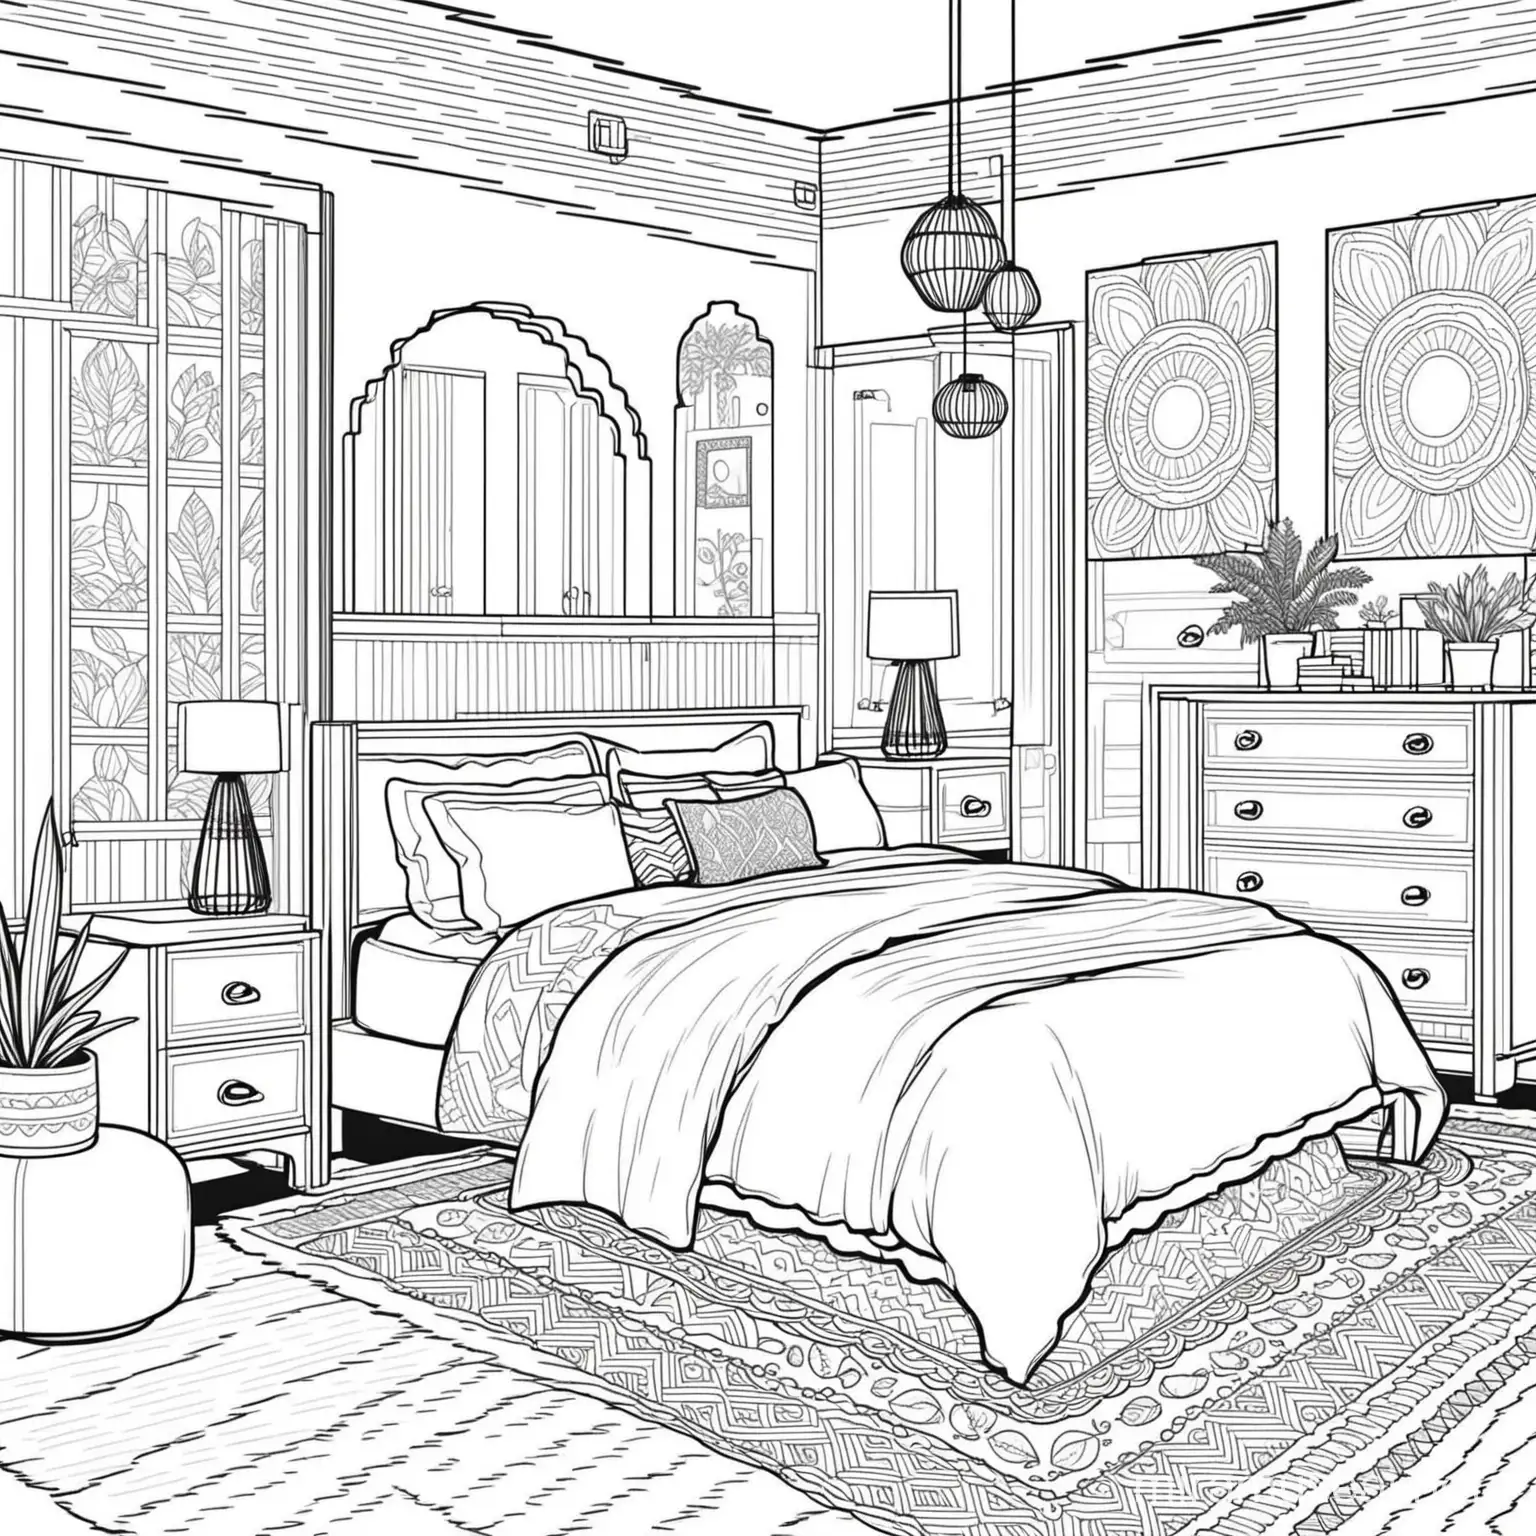 adult coloring page, black and white, easy to color, home interior design, bedroom, unique, modern, boho, cute, Scandinavian
